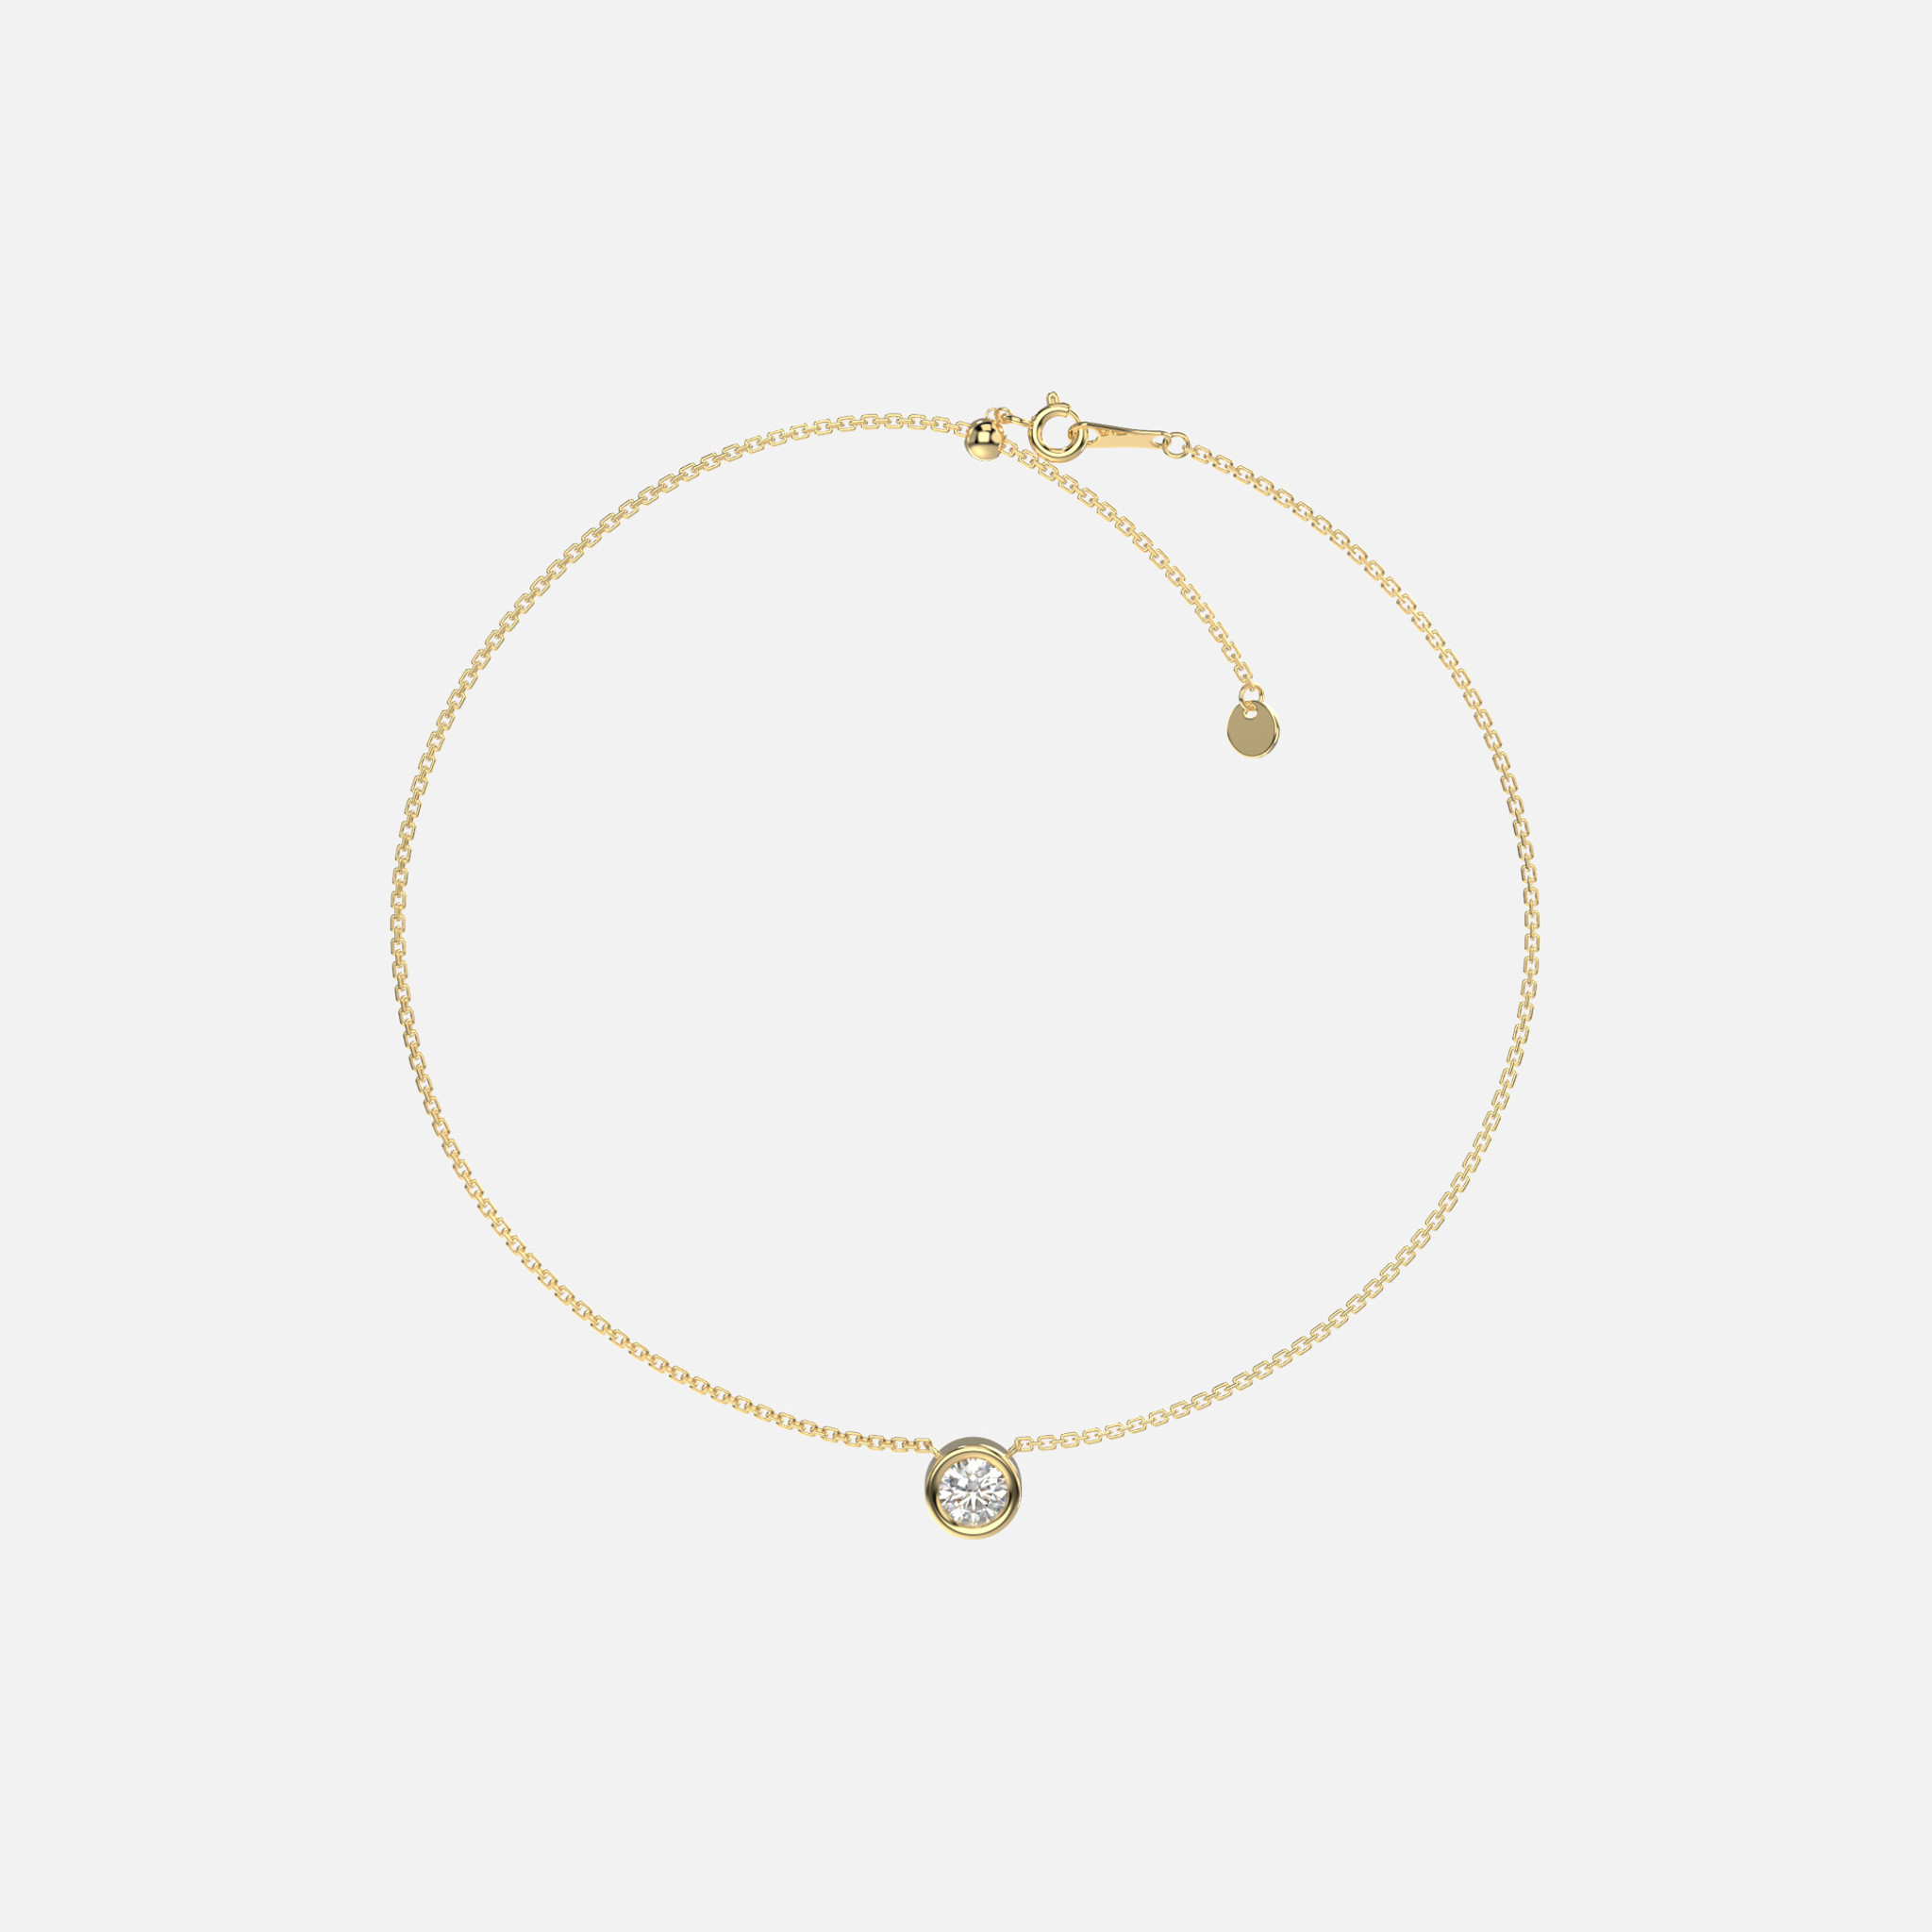 Gold Solitaire Diamond Bracelet - Handcrafted in 18k gold, this exquisite bracelet features a 0.41ct round cut diamond on a delicate cable chain.